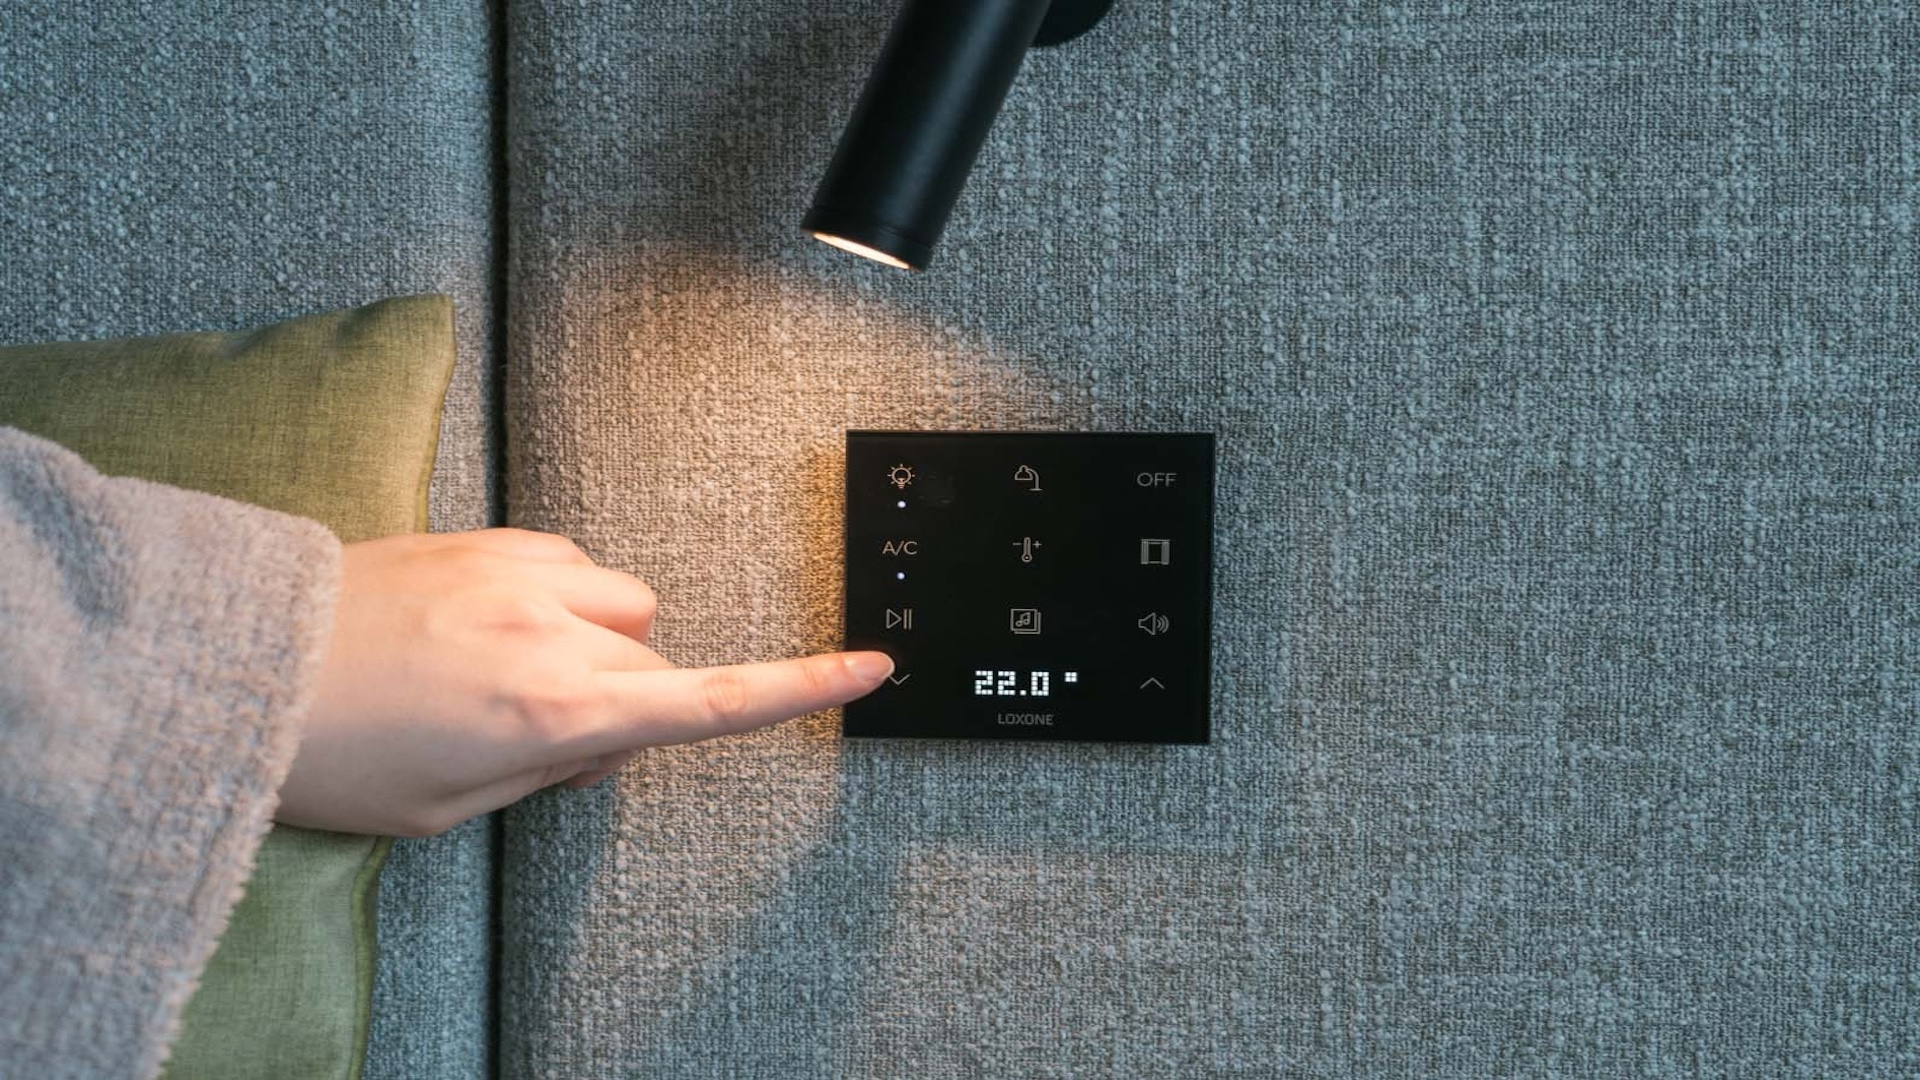 The Touch Pure Flex makes it easier to operate technology in the hotel room.